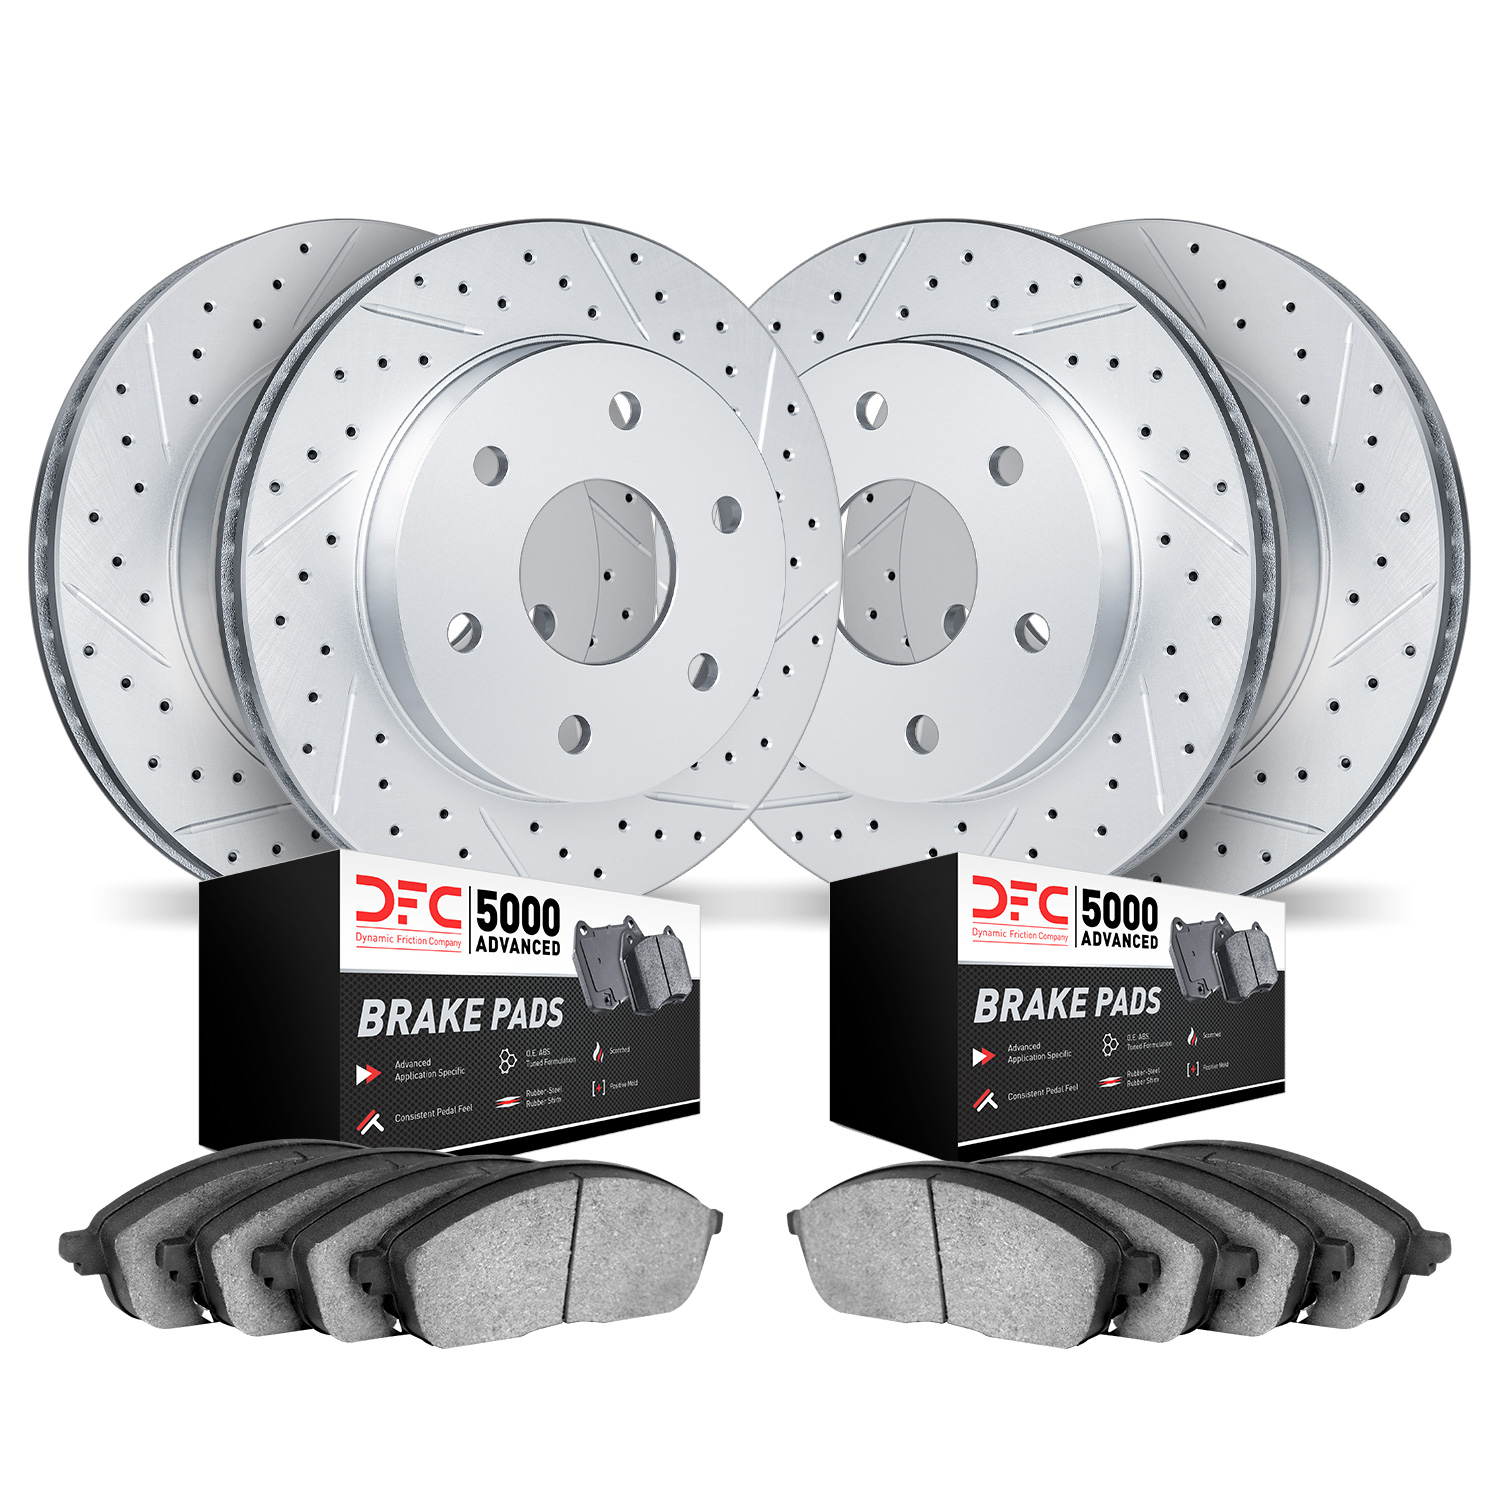 2504-48032 Geoperformance Drilled/Slotted Rotors w/5000 Advanced Brake Pads Kit, 2002-2005 GM, Position: Front and Rear